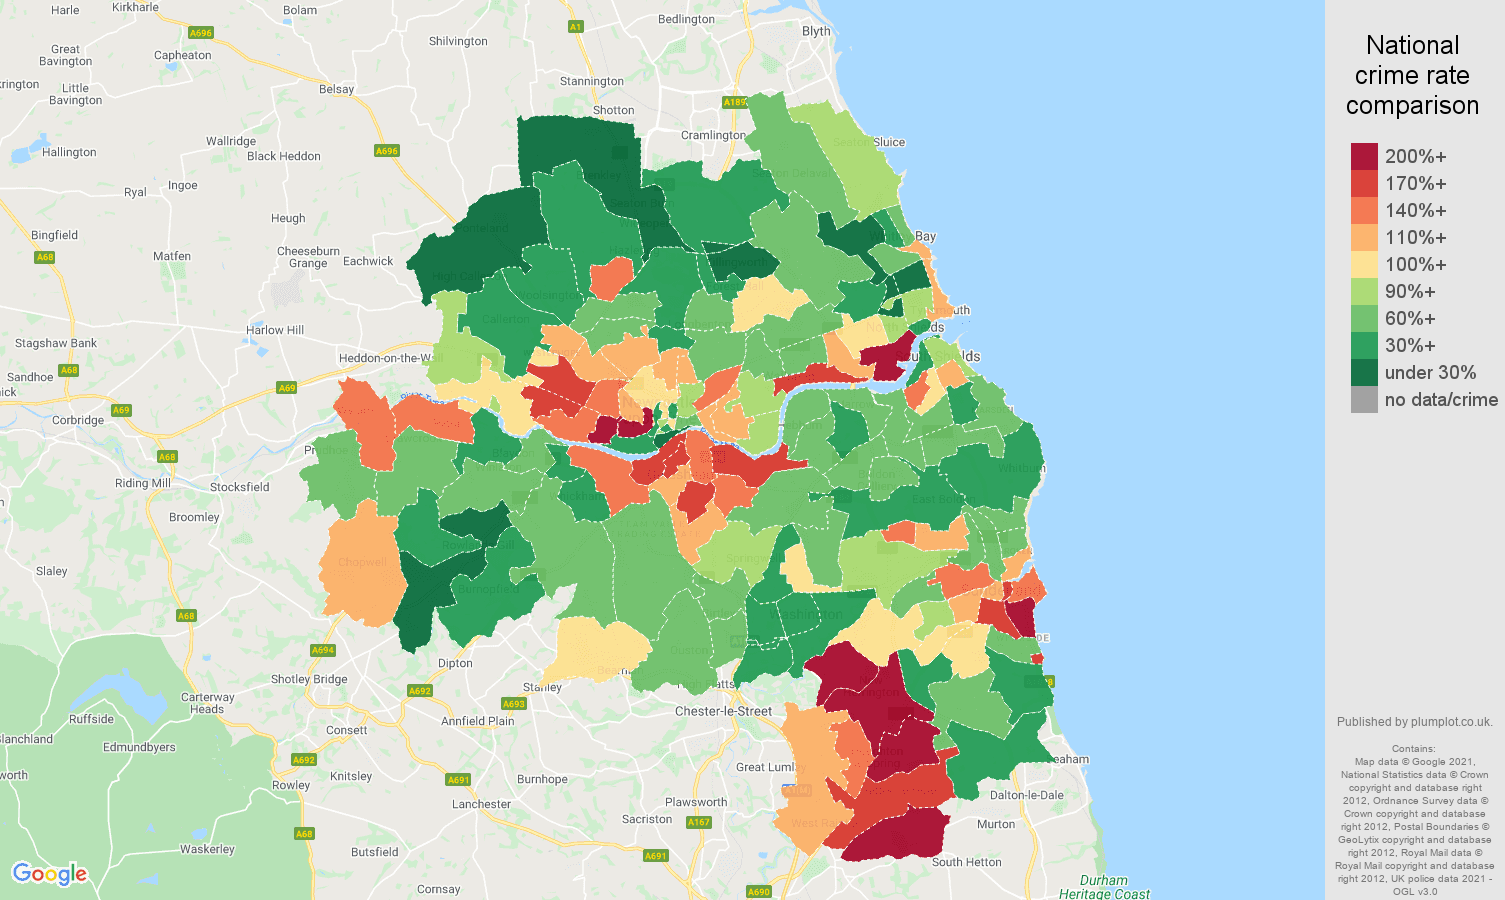 Tyne and Wear burglary crime rate comparison map